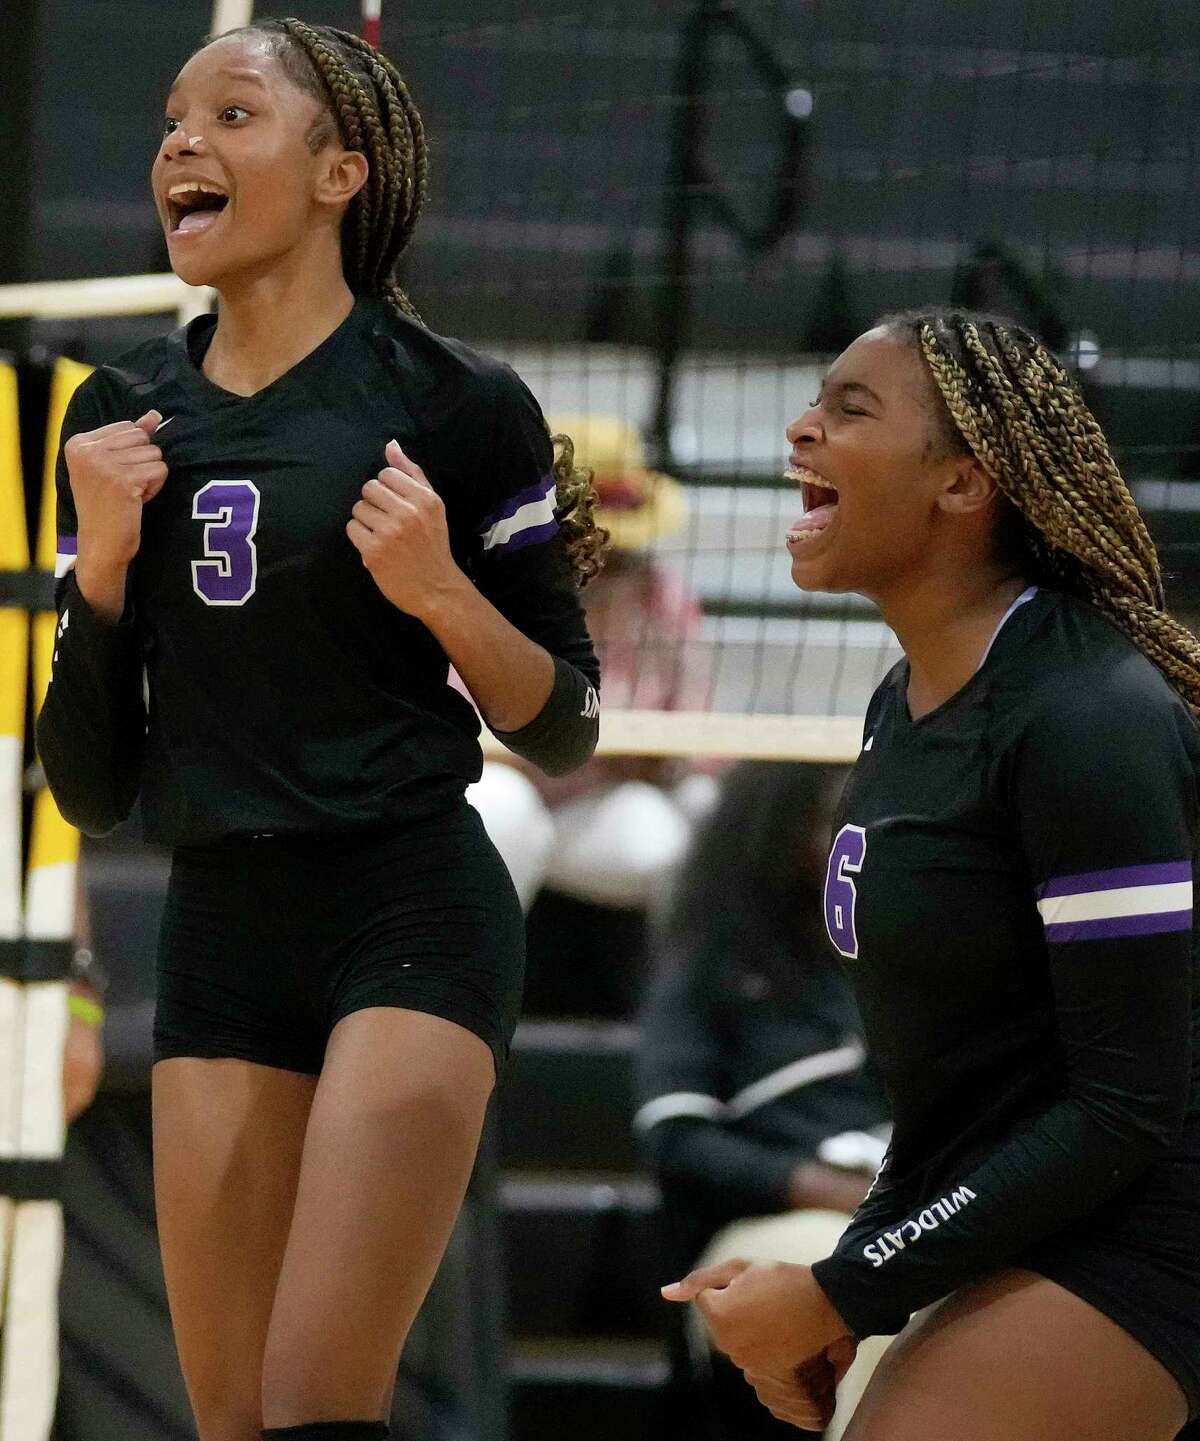 Humble's Trabrece Marbley (3) celebrates her point with Jada James during a high school volleyball match against Eisenhower, Tuesday, Aug. 23, 2022, in Houston.